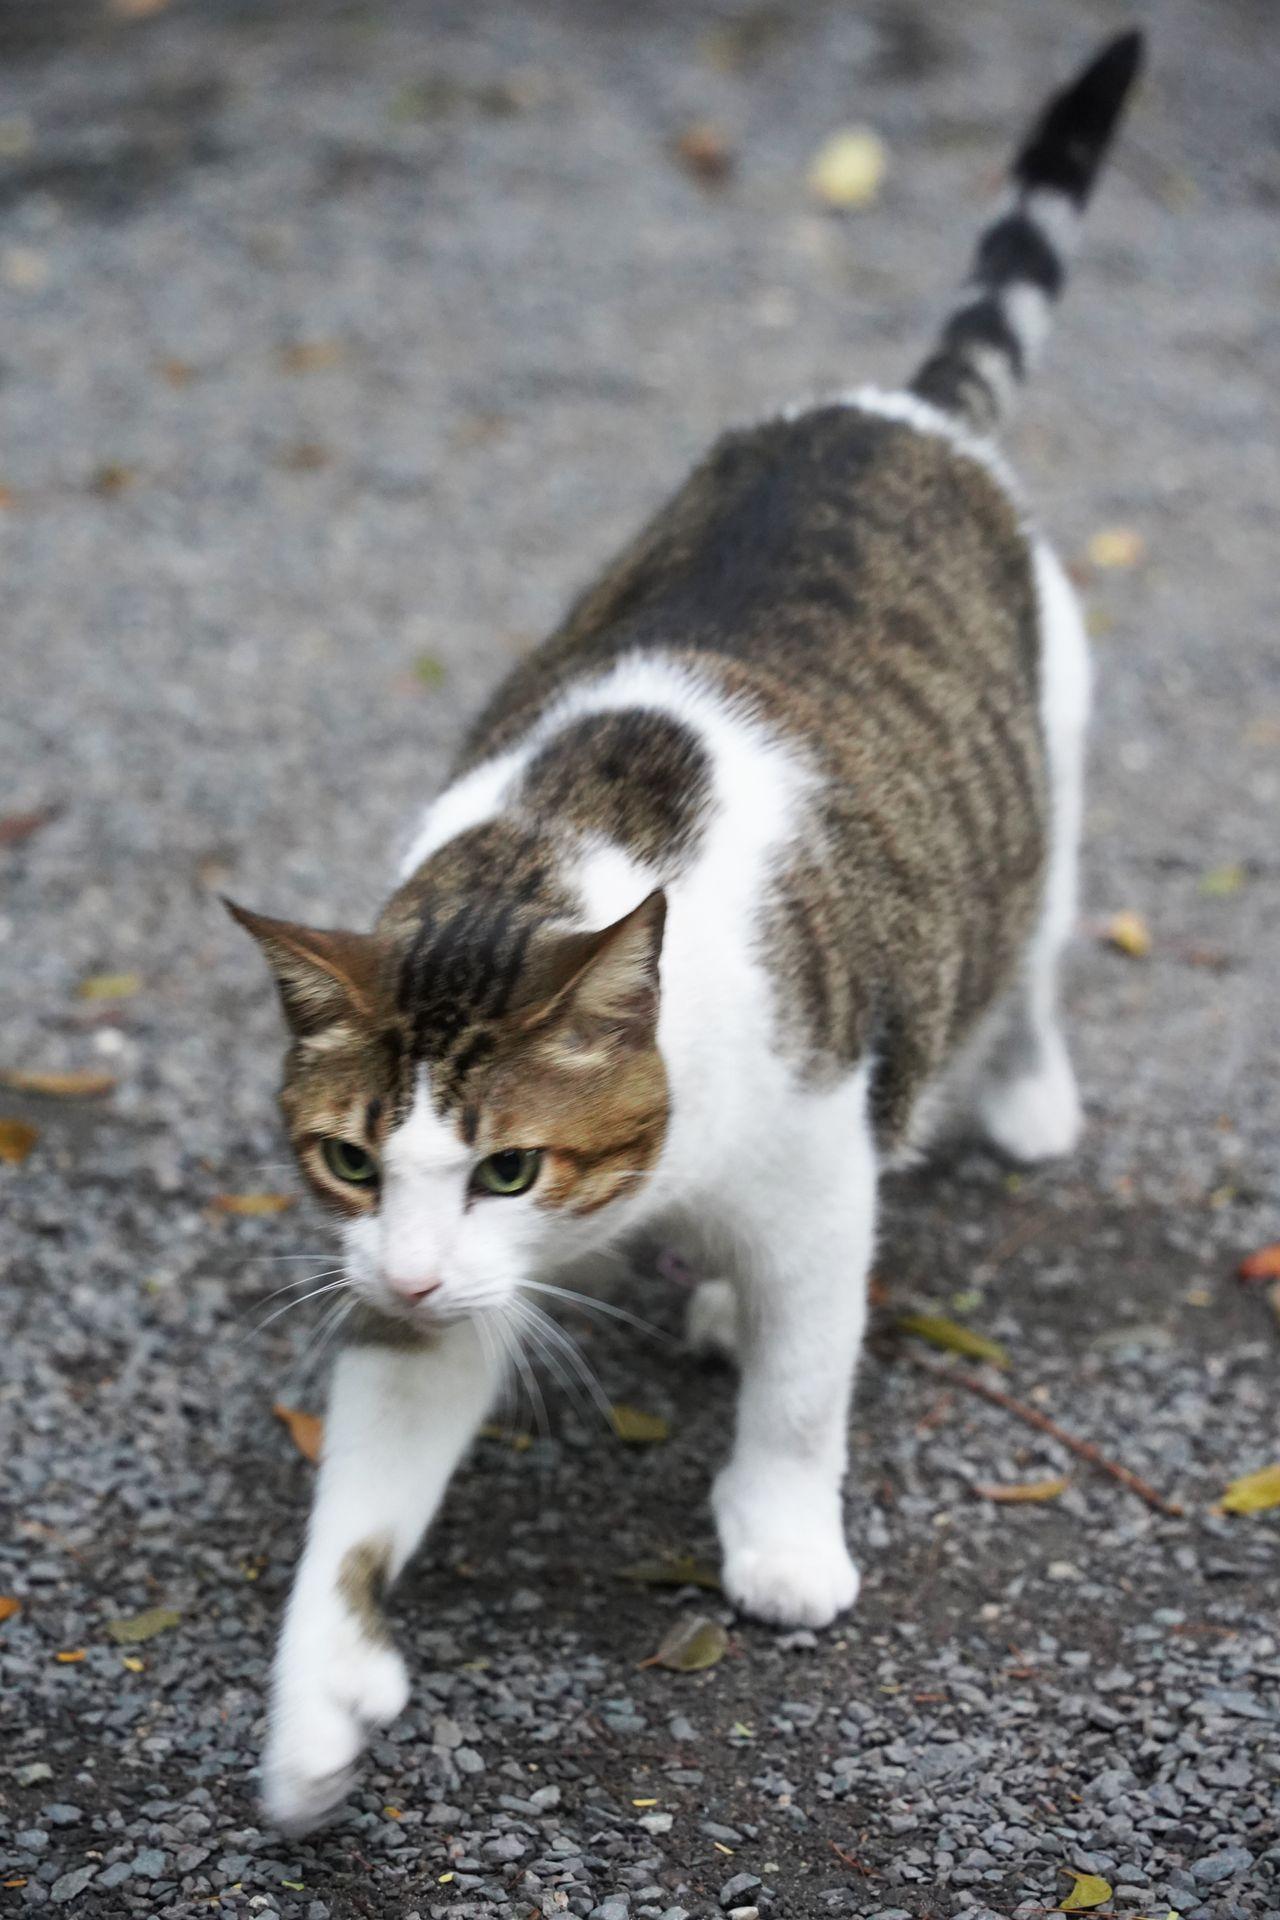 A close up of a white and brown cat walking forward